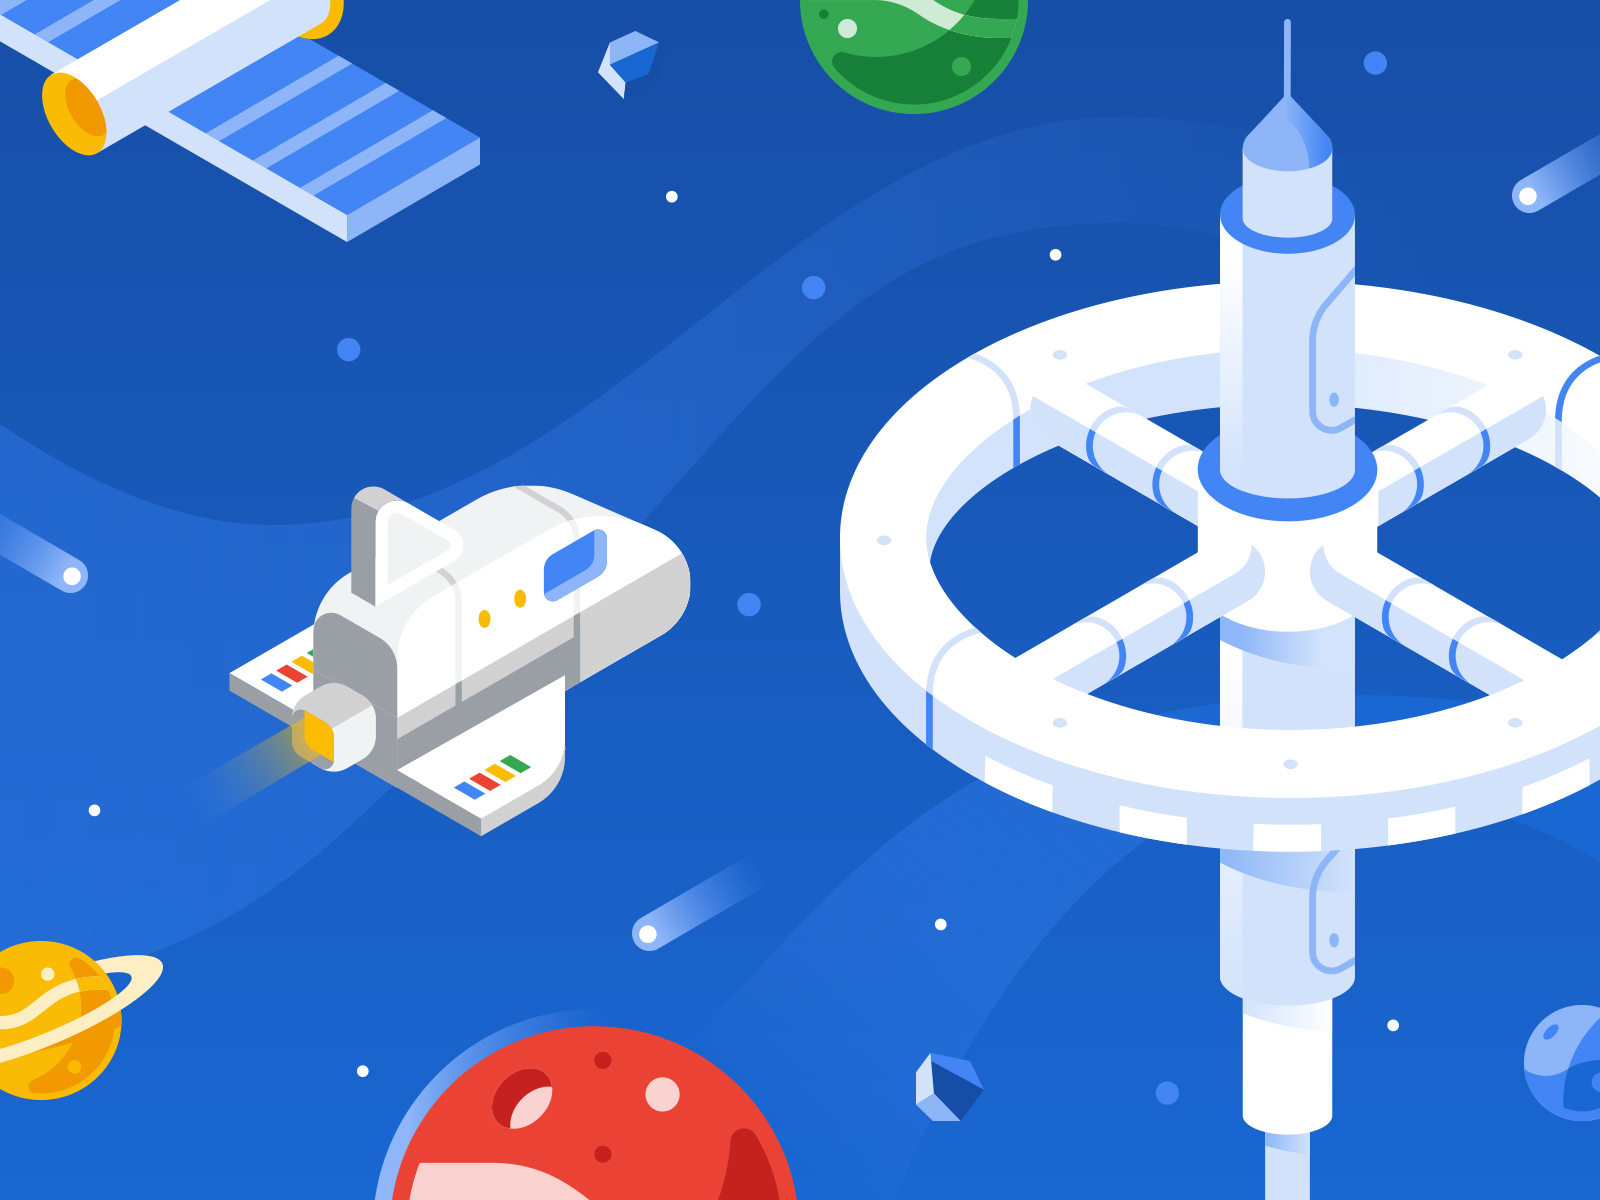 Google - Videogame about Online Security #1 asteroid astronaut flat game geometric google illustration planet space spaceship station videogame